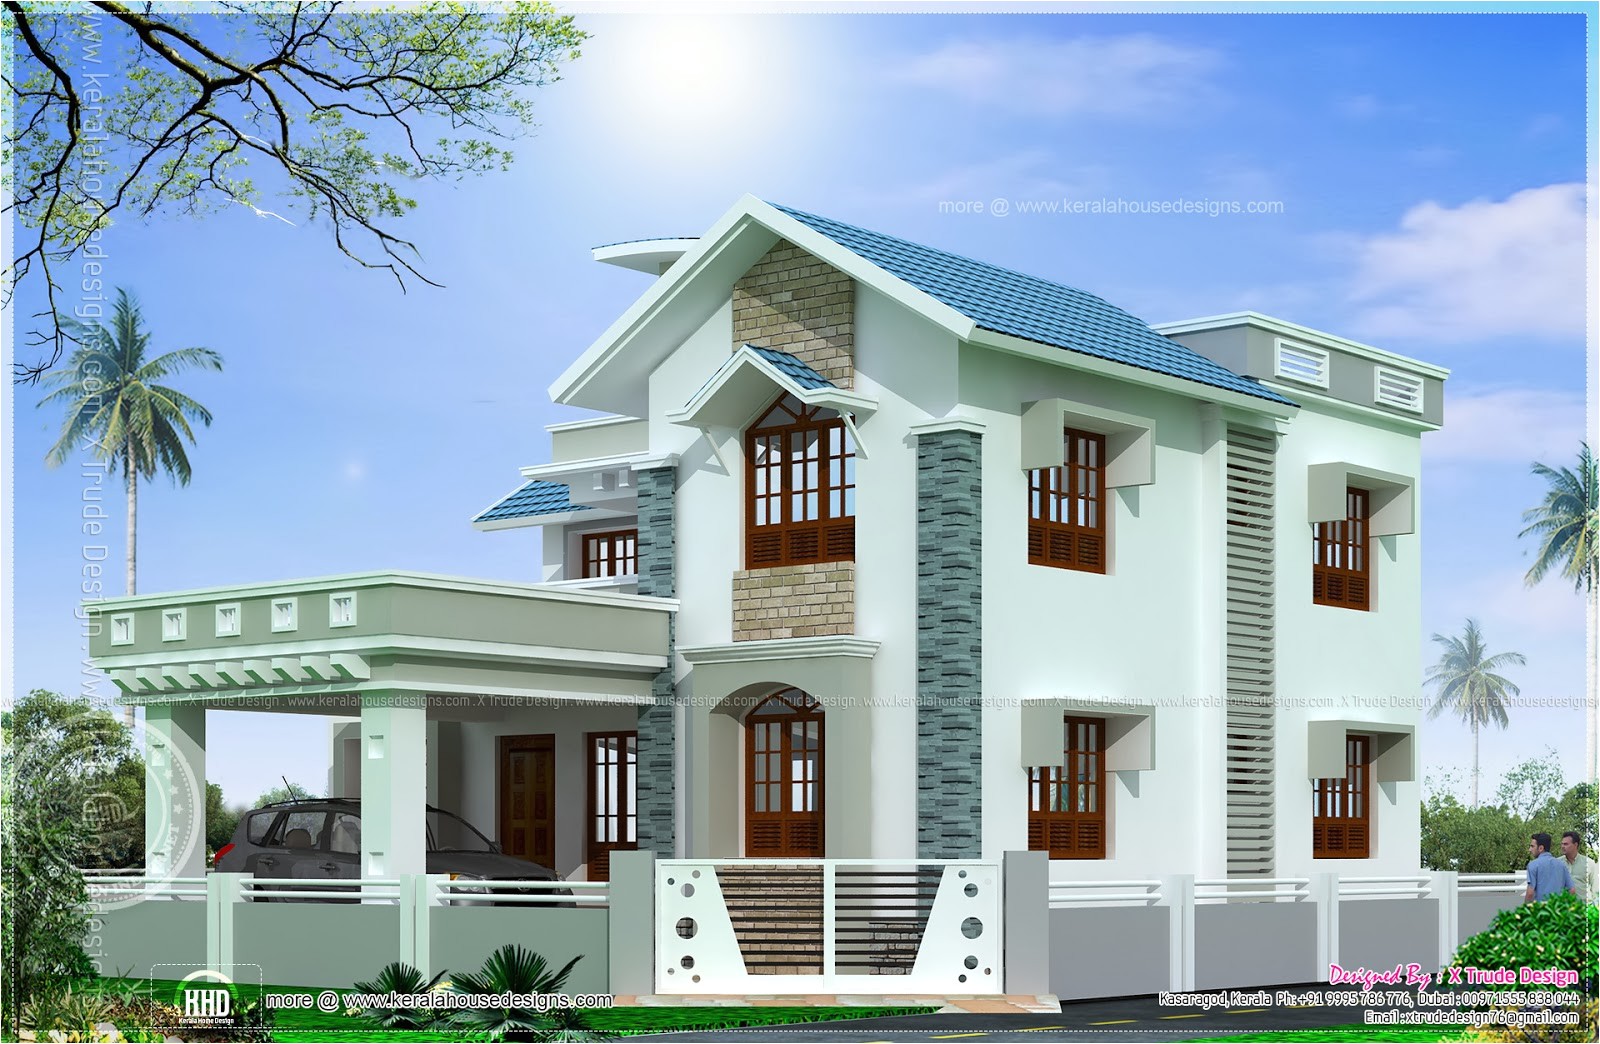 modern beautiful home design indian house plans beautiful home design in india beautiful home design pictures